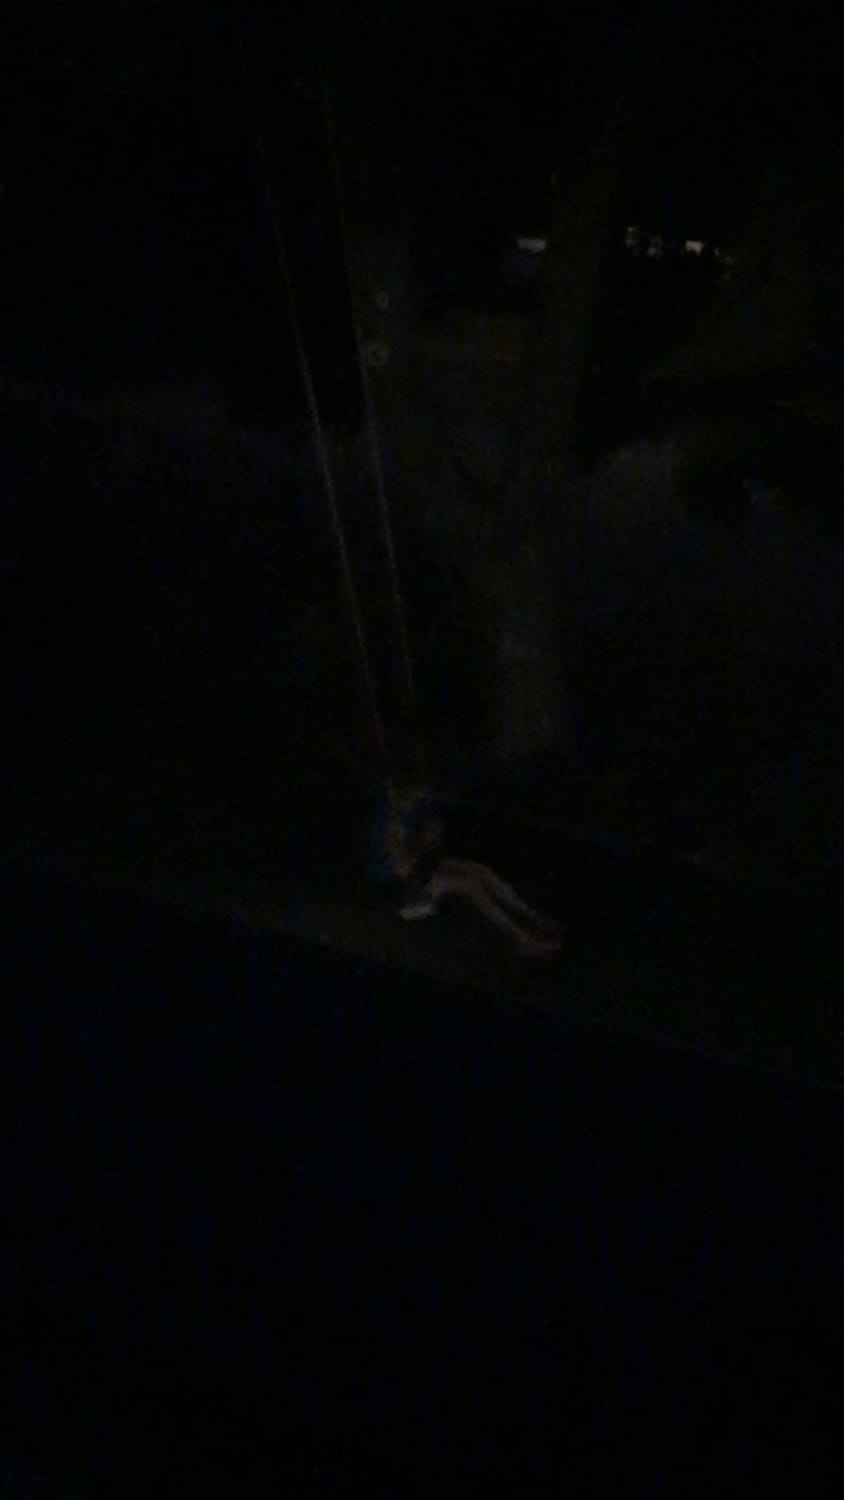 Stranger swinging in our front yard in the middle of the night